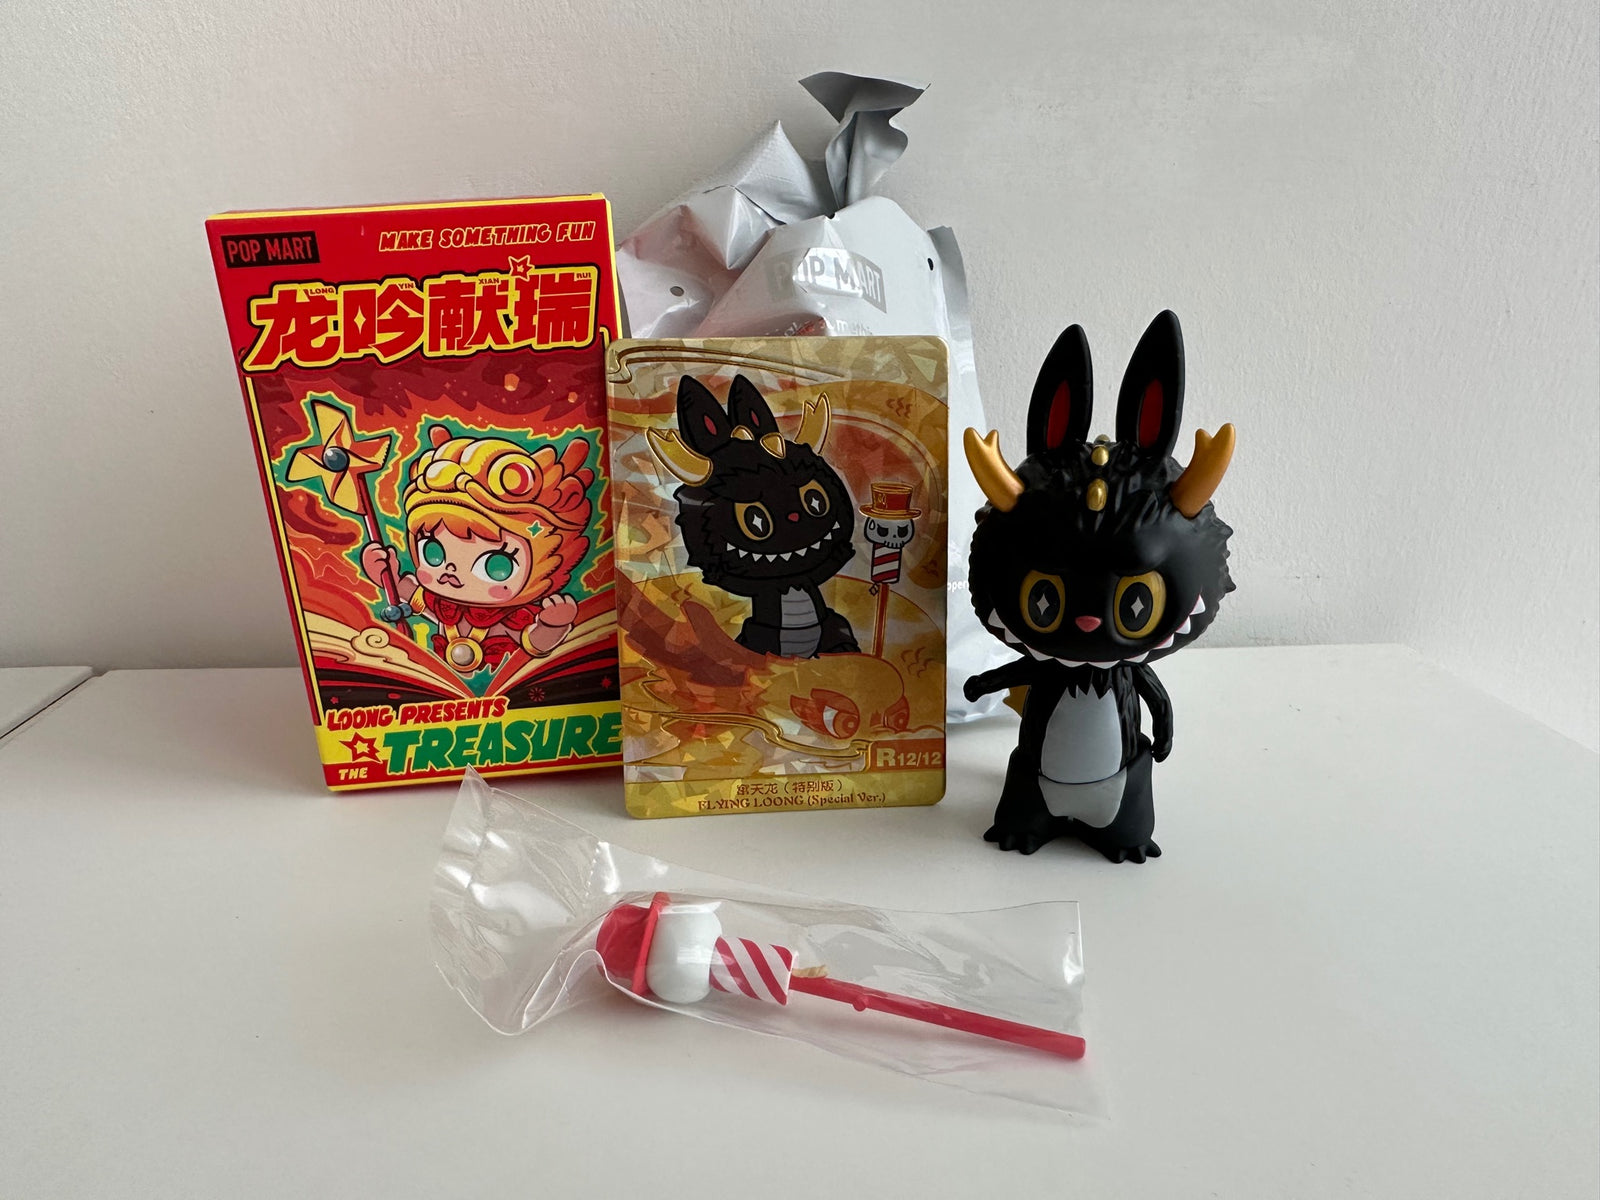 (LABUBU) Flying Loong (Special Version) - Loong Presents the Treasure Series Figures by POP MART - 2